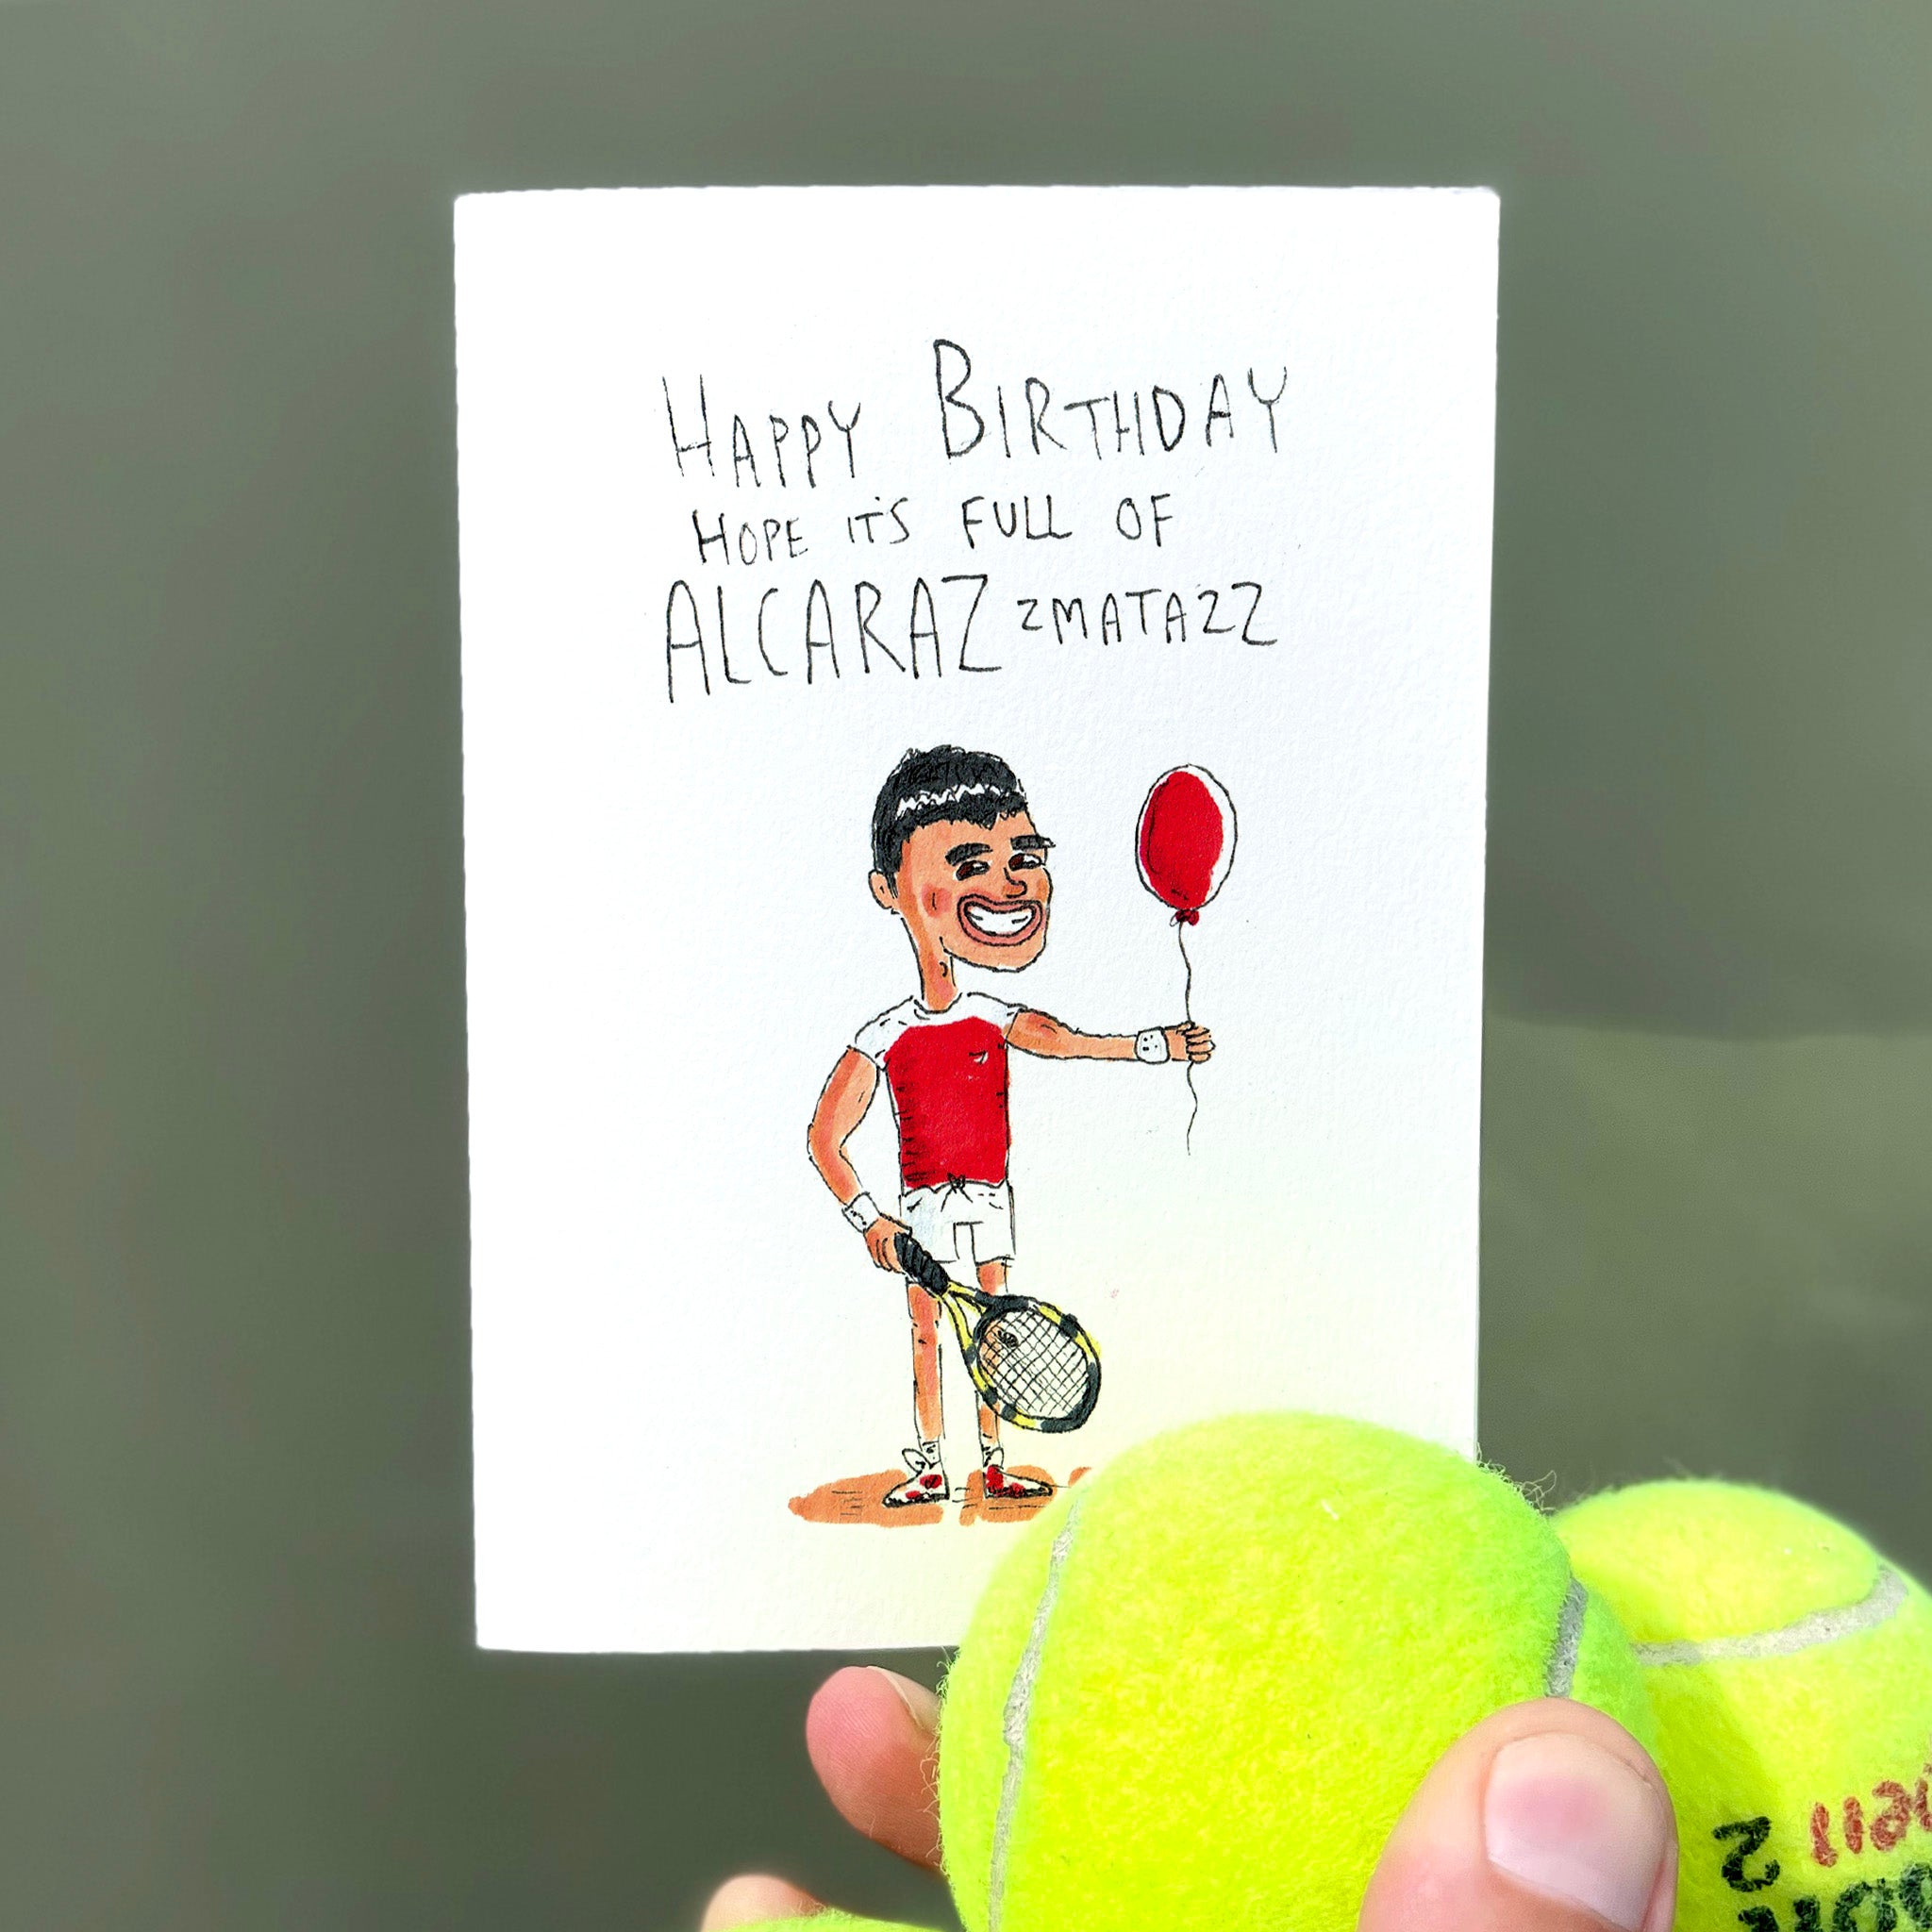 Happy Birthday Hope it's Full of Alacarazzmatazz - TENNIS FANS collection